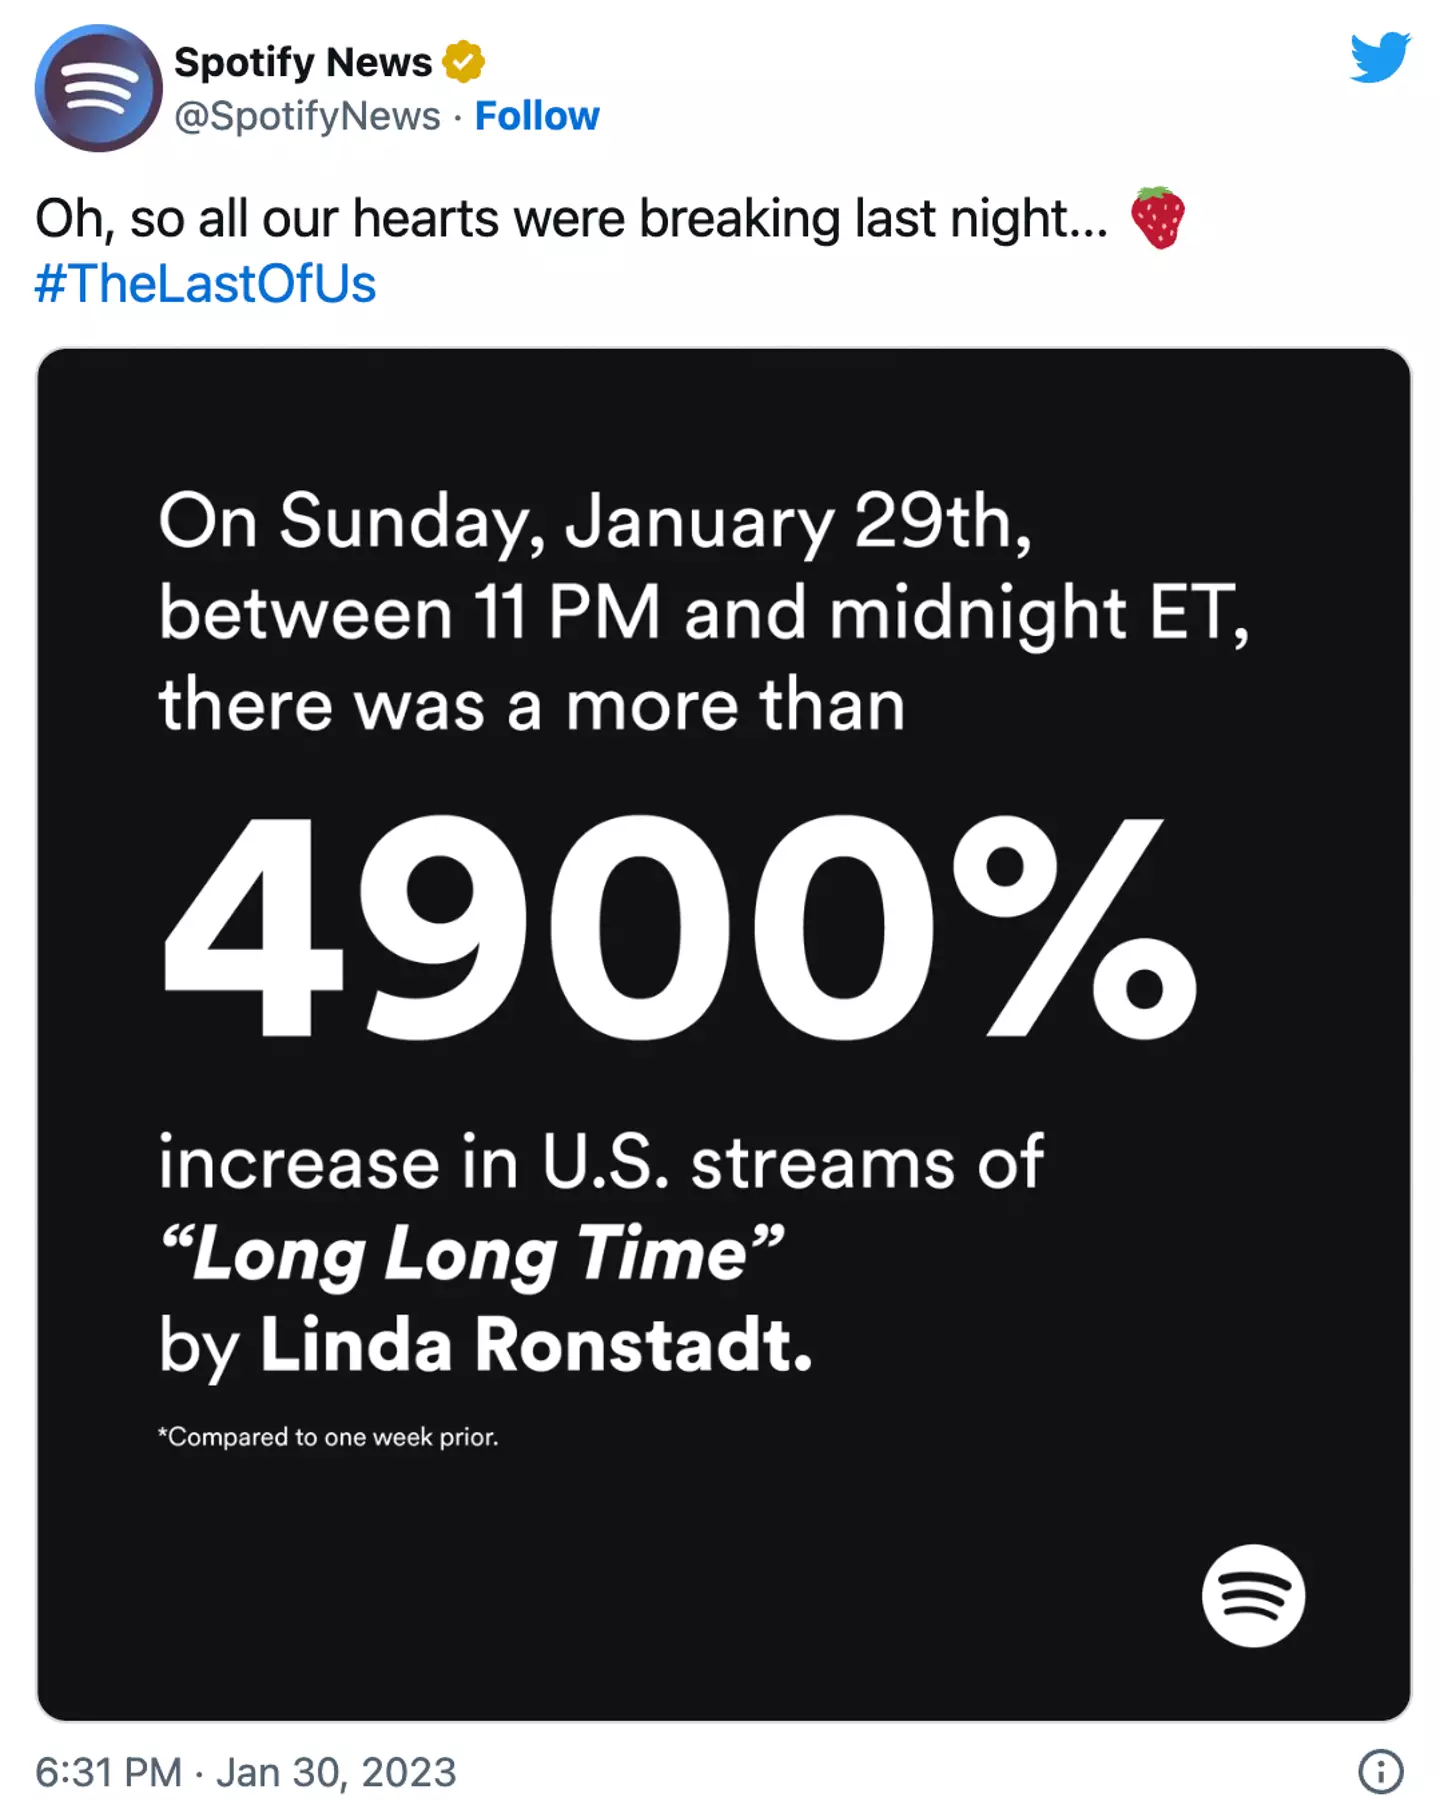 The song saw a 4,900 percent increase in US streams compared to the previous week.